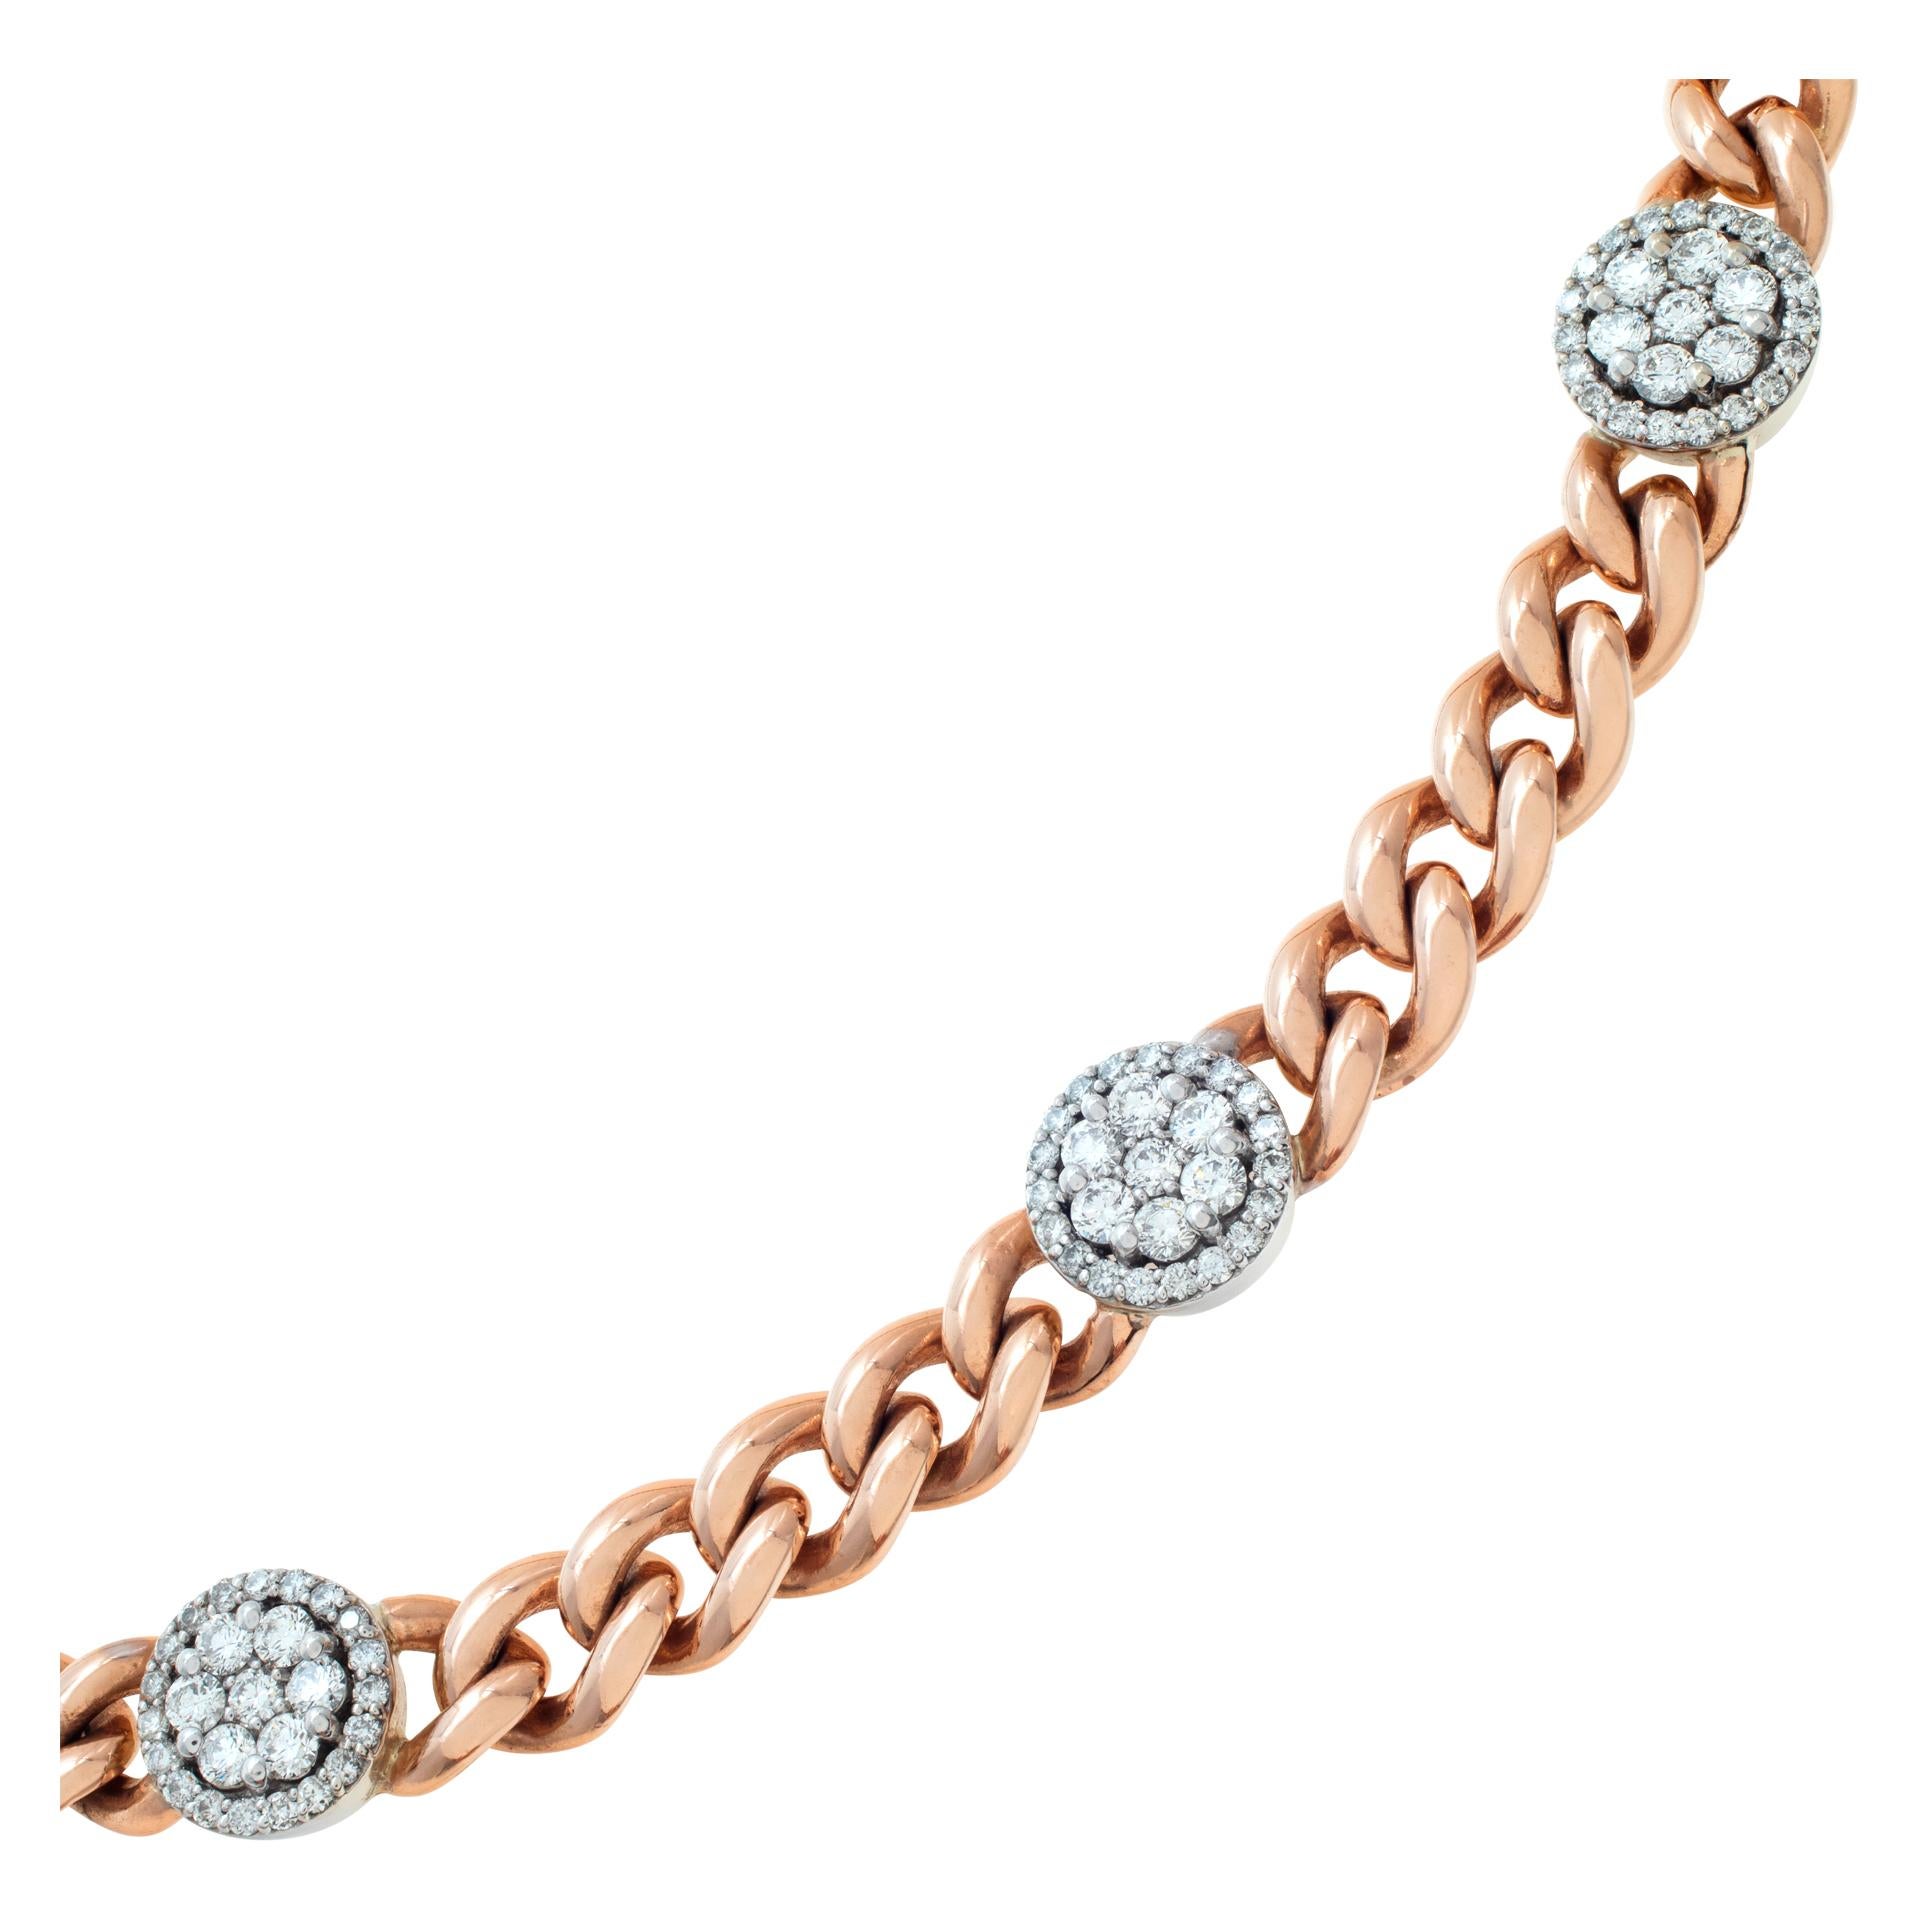 Fashionable 14k rose gold choker with diamond stations approximately 2.40 carats in G-H color, VS clarity diamonds. Length 13